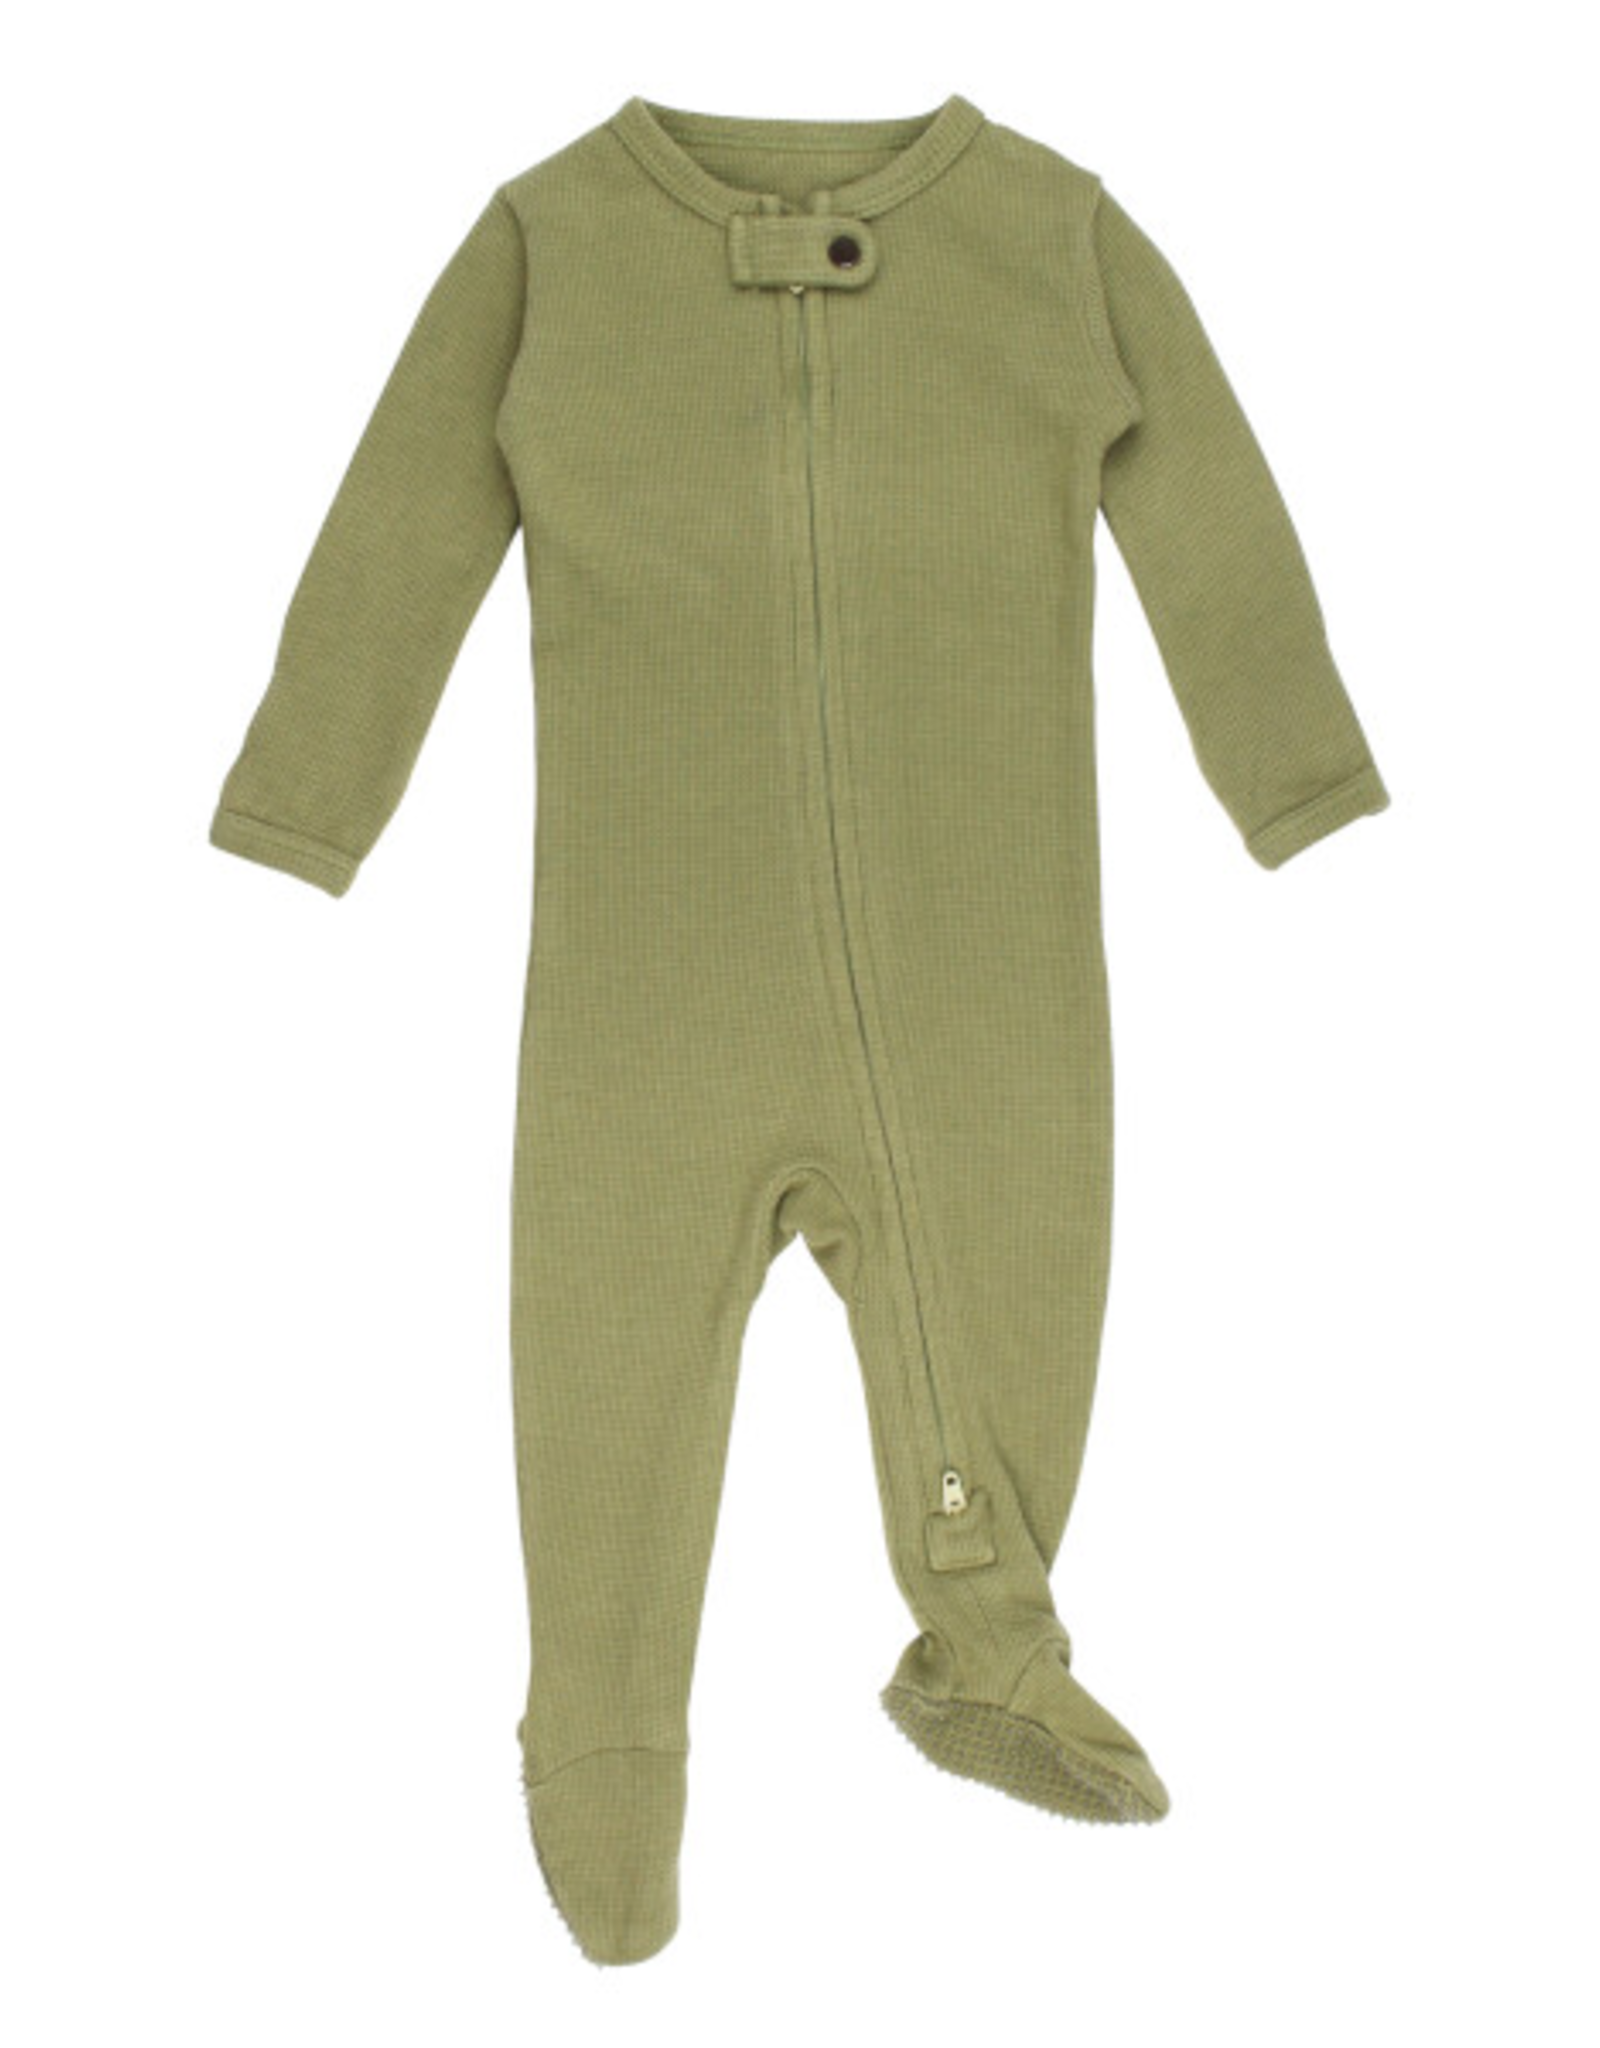 L'oved Baby Thermal Zipper Footie Sage